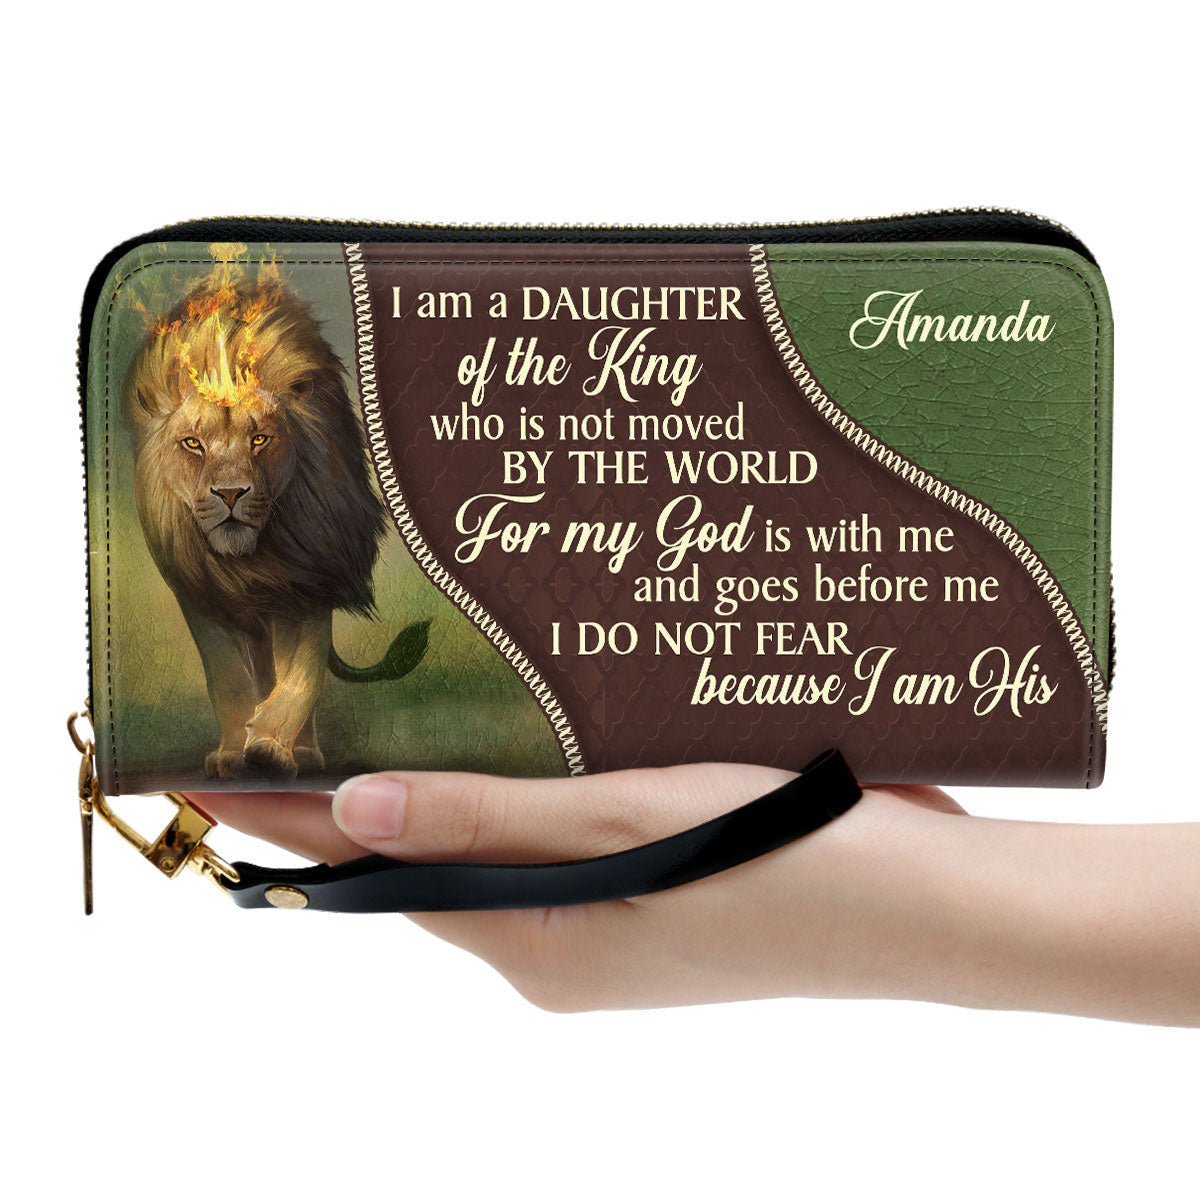 Personalized Clutch Purse - I Am A Daughter Of The King Clutch Purse - Women Clutch Purse